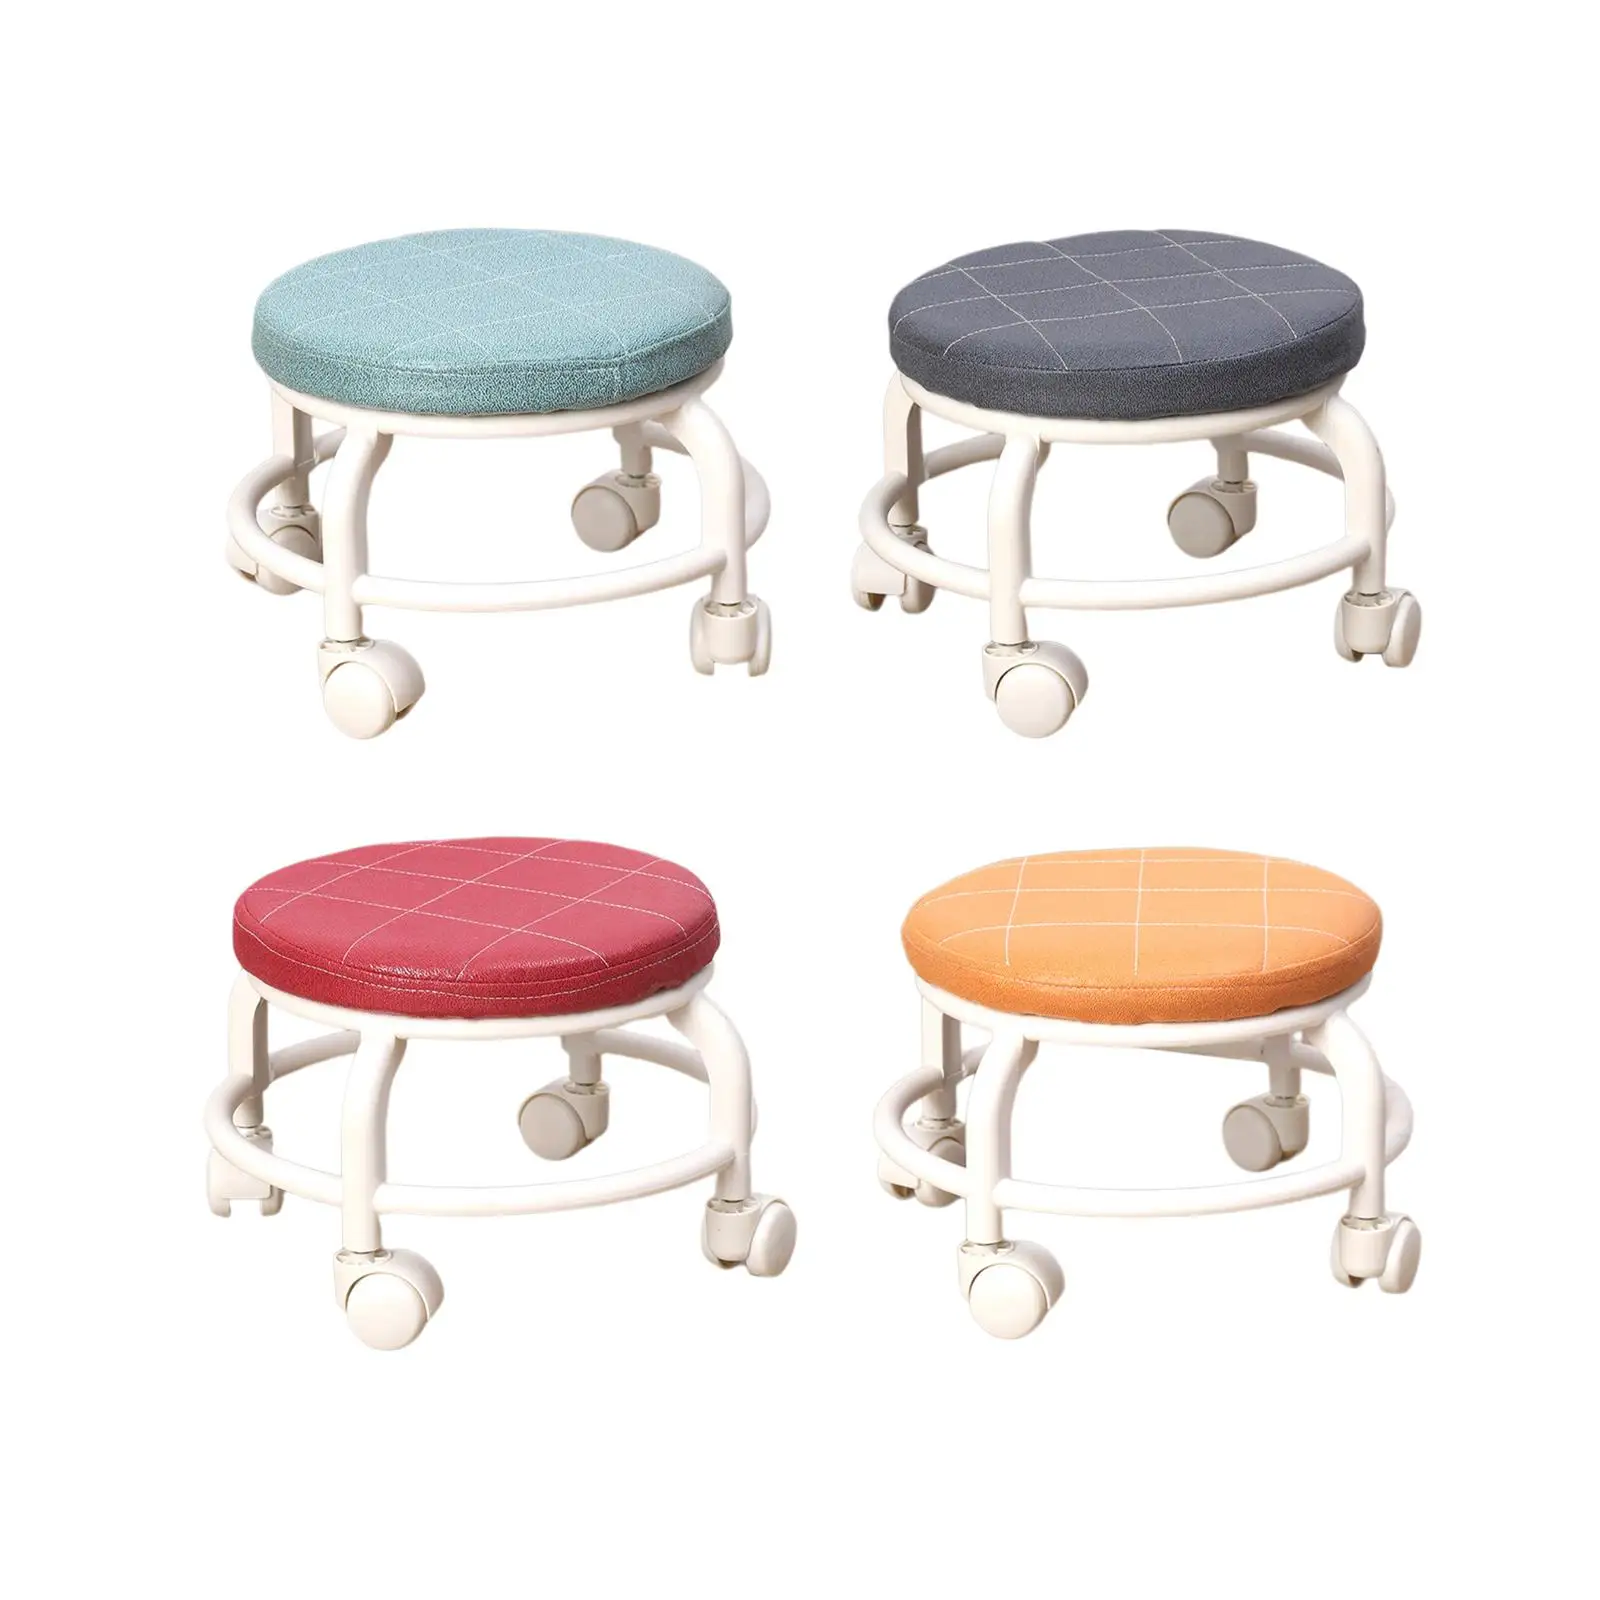 Low Rolling Stool Multifunctional Short Small Stool Chair Universal Swivel Casters Small Shoe Stool Seat for Shop Kids and Adult